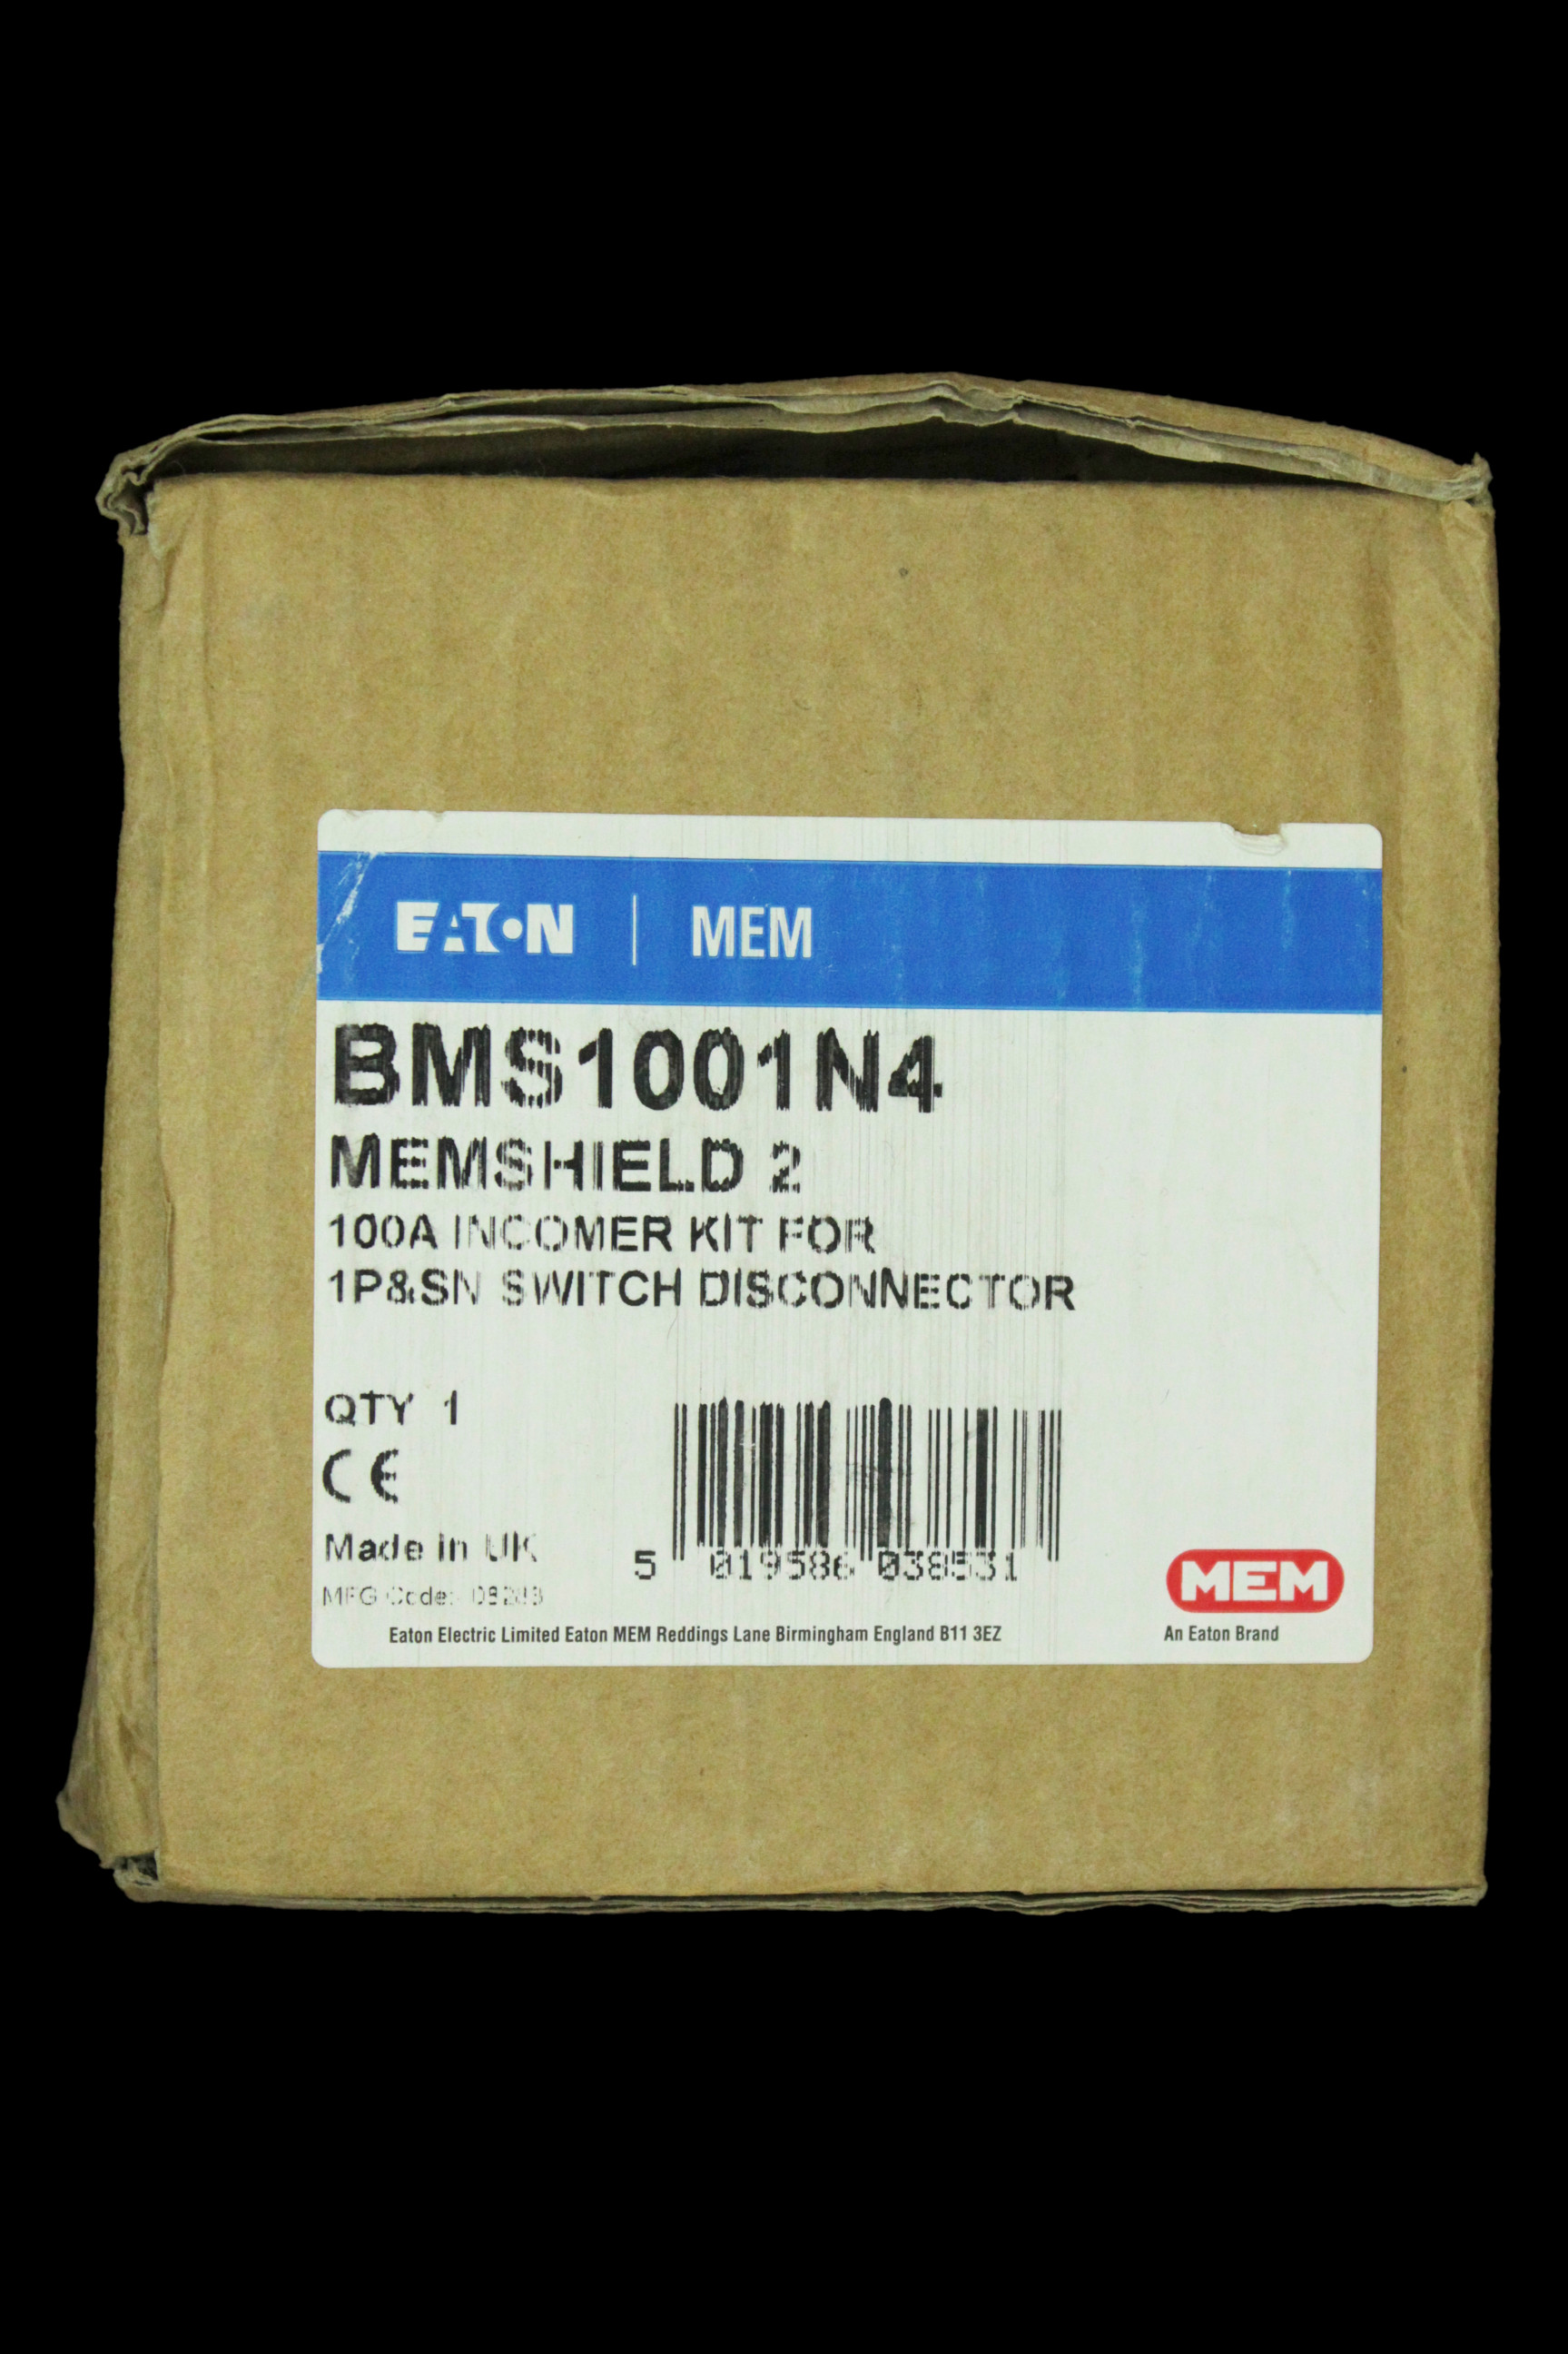 EATON 100 AMP 1P&SN INCOMER KIT SWITCH DISCONNECTOR BMS1001N4